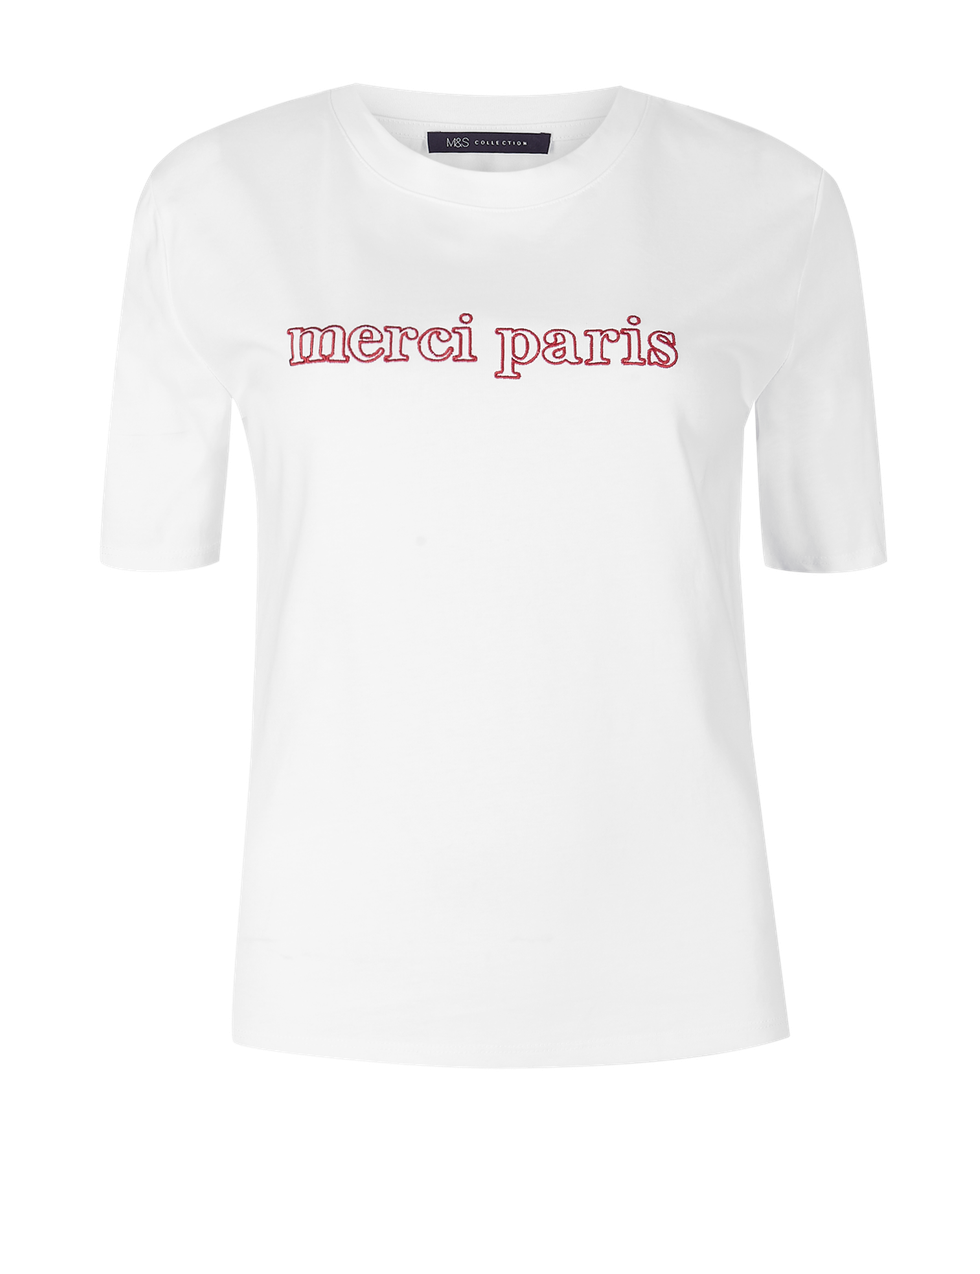 T-shirt, White, Clothing, Text, Black, Sleeve, Top, Active shirt, Font, Neck, 